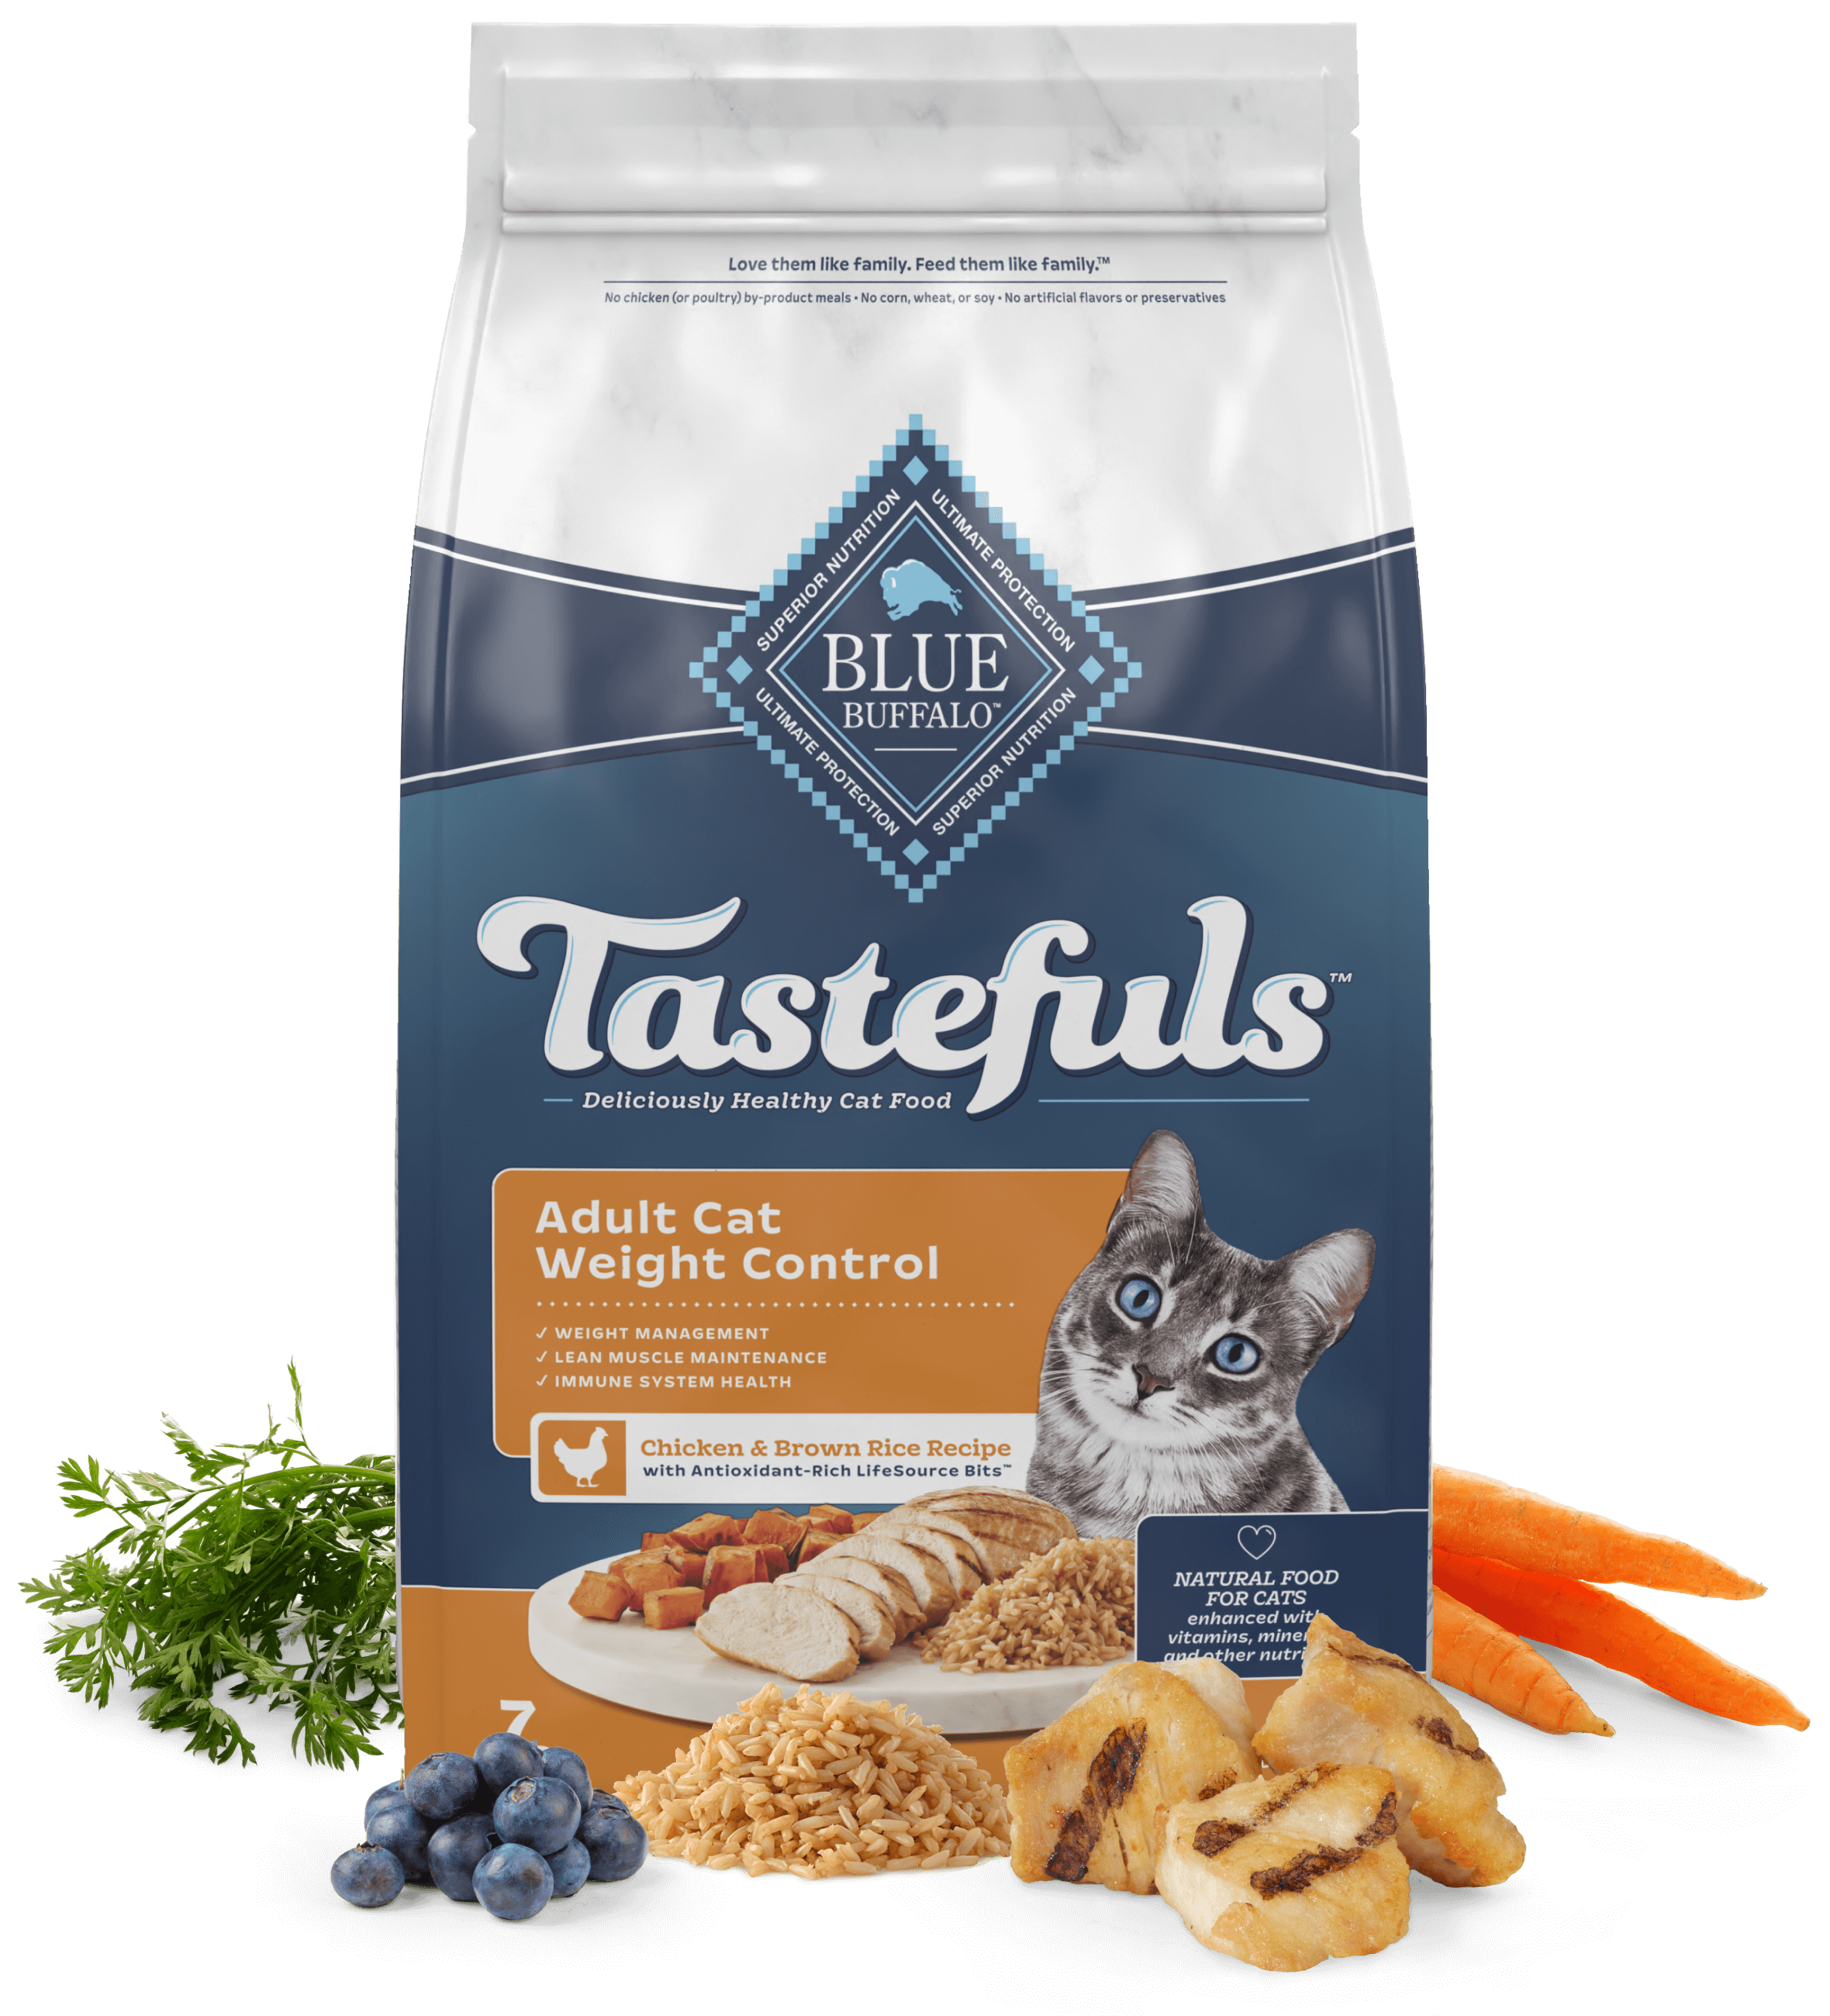 A package of Blue Buffalo Adult Cat Weight Control Chicken & Brown Rice Recipe cat food with images of fresh ingredients alongside.